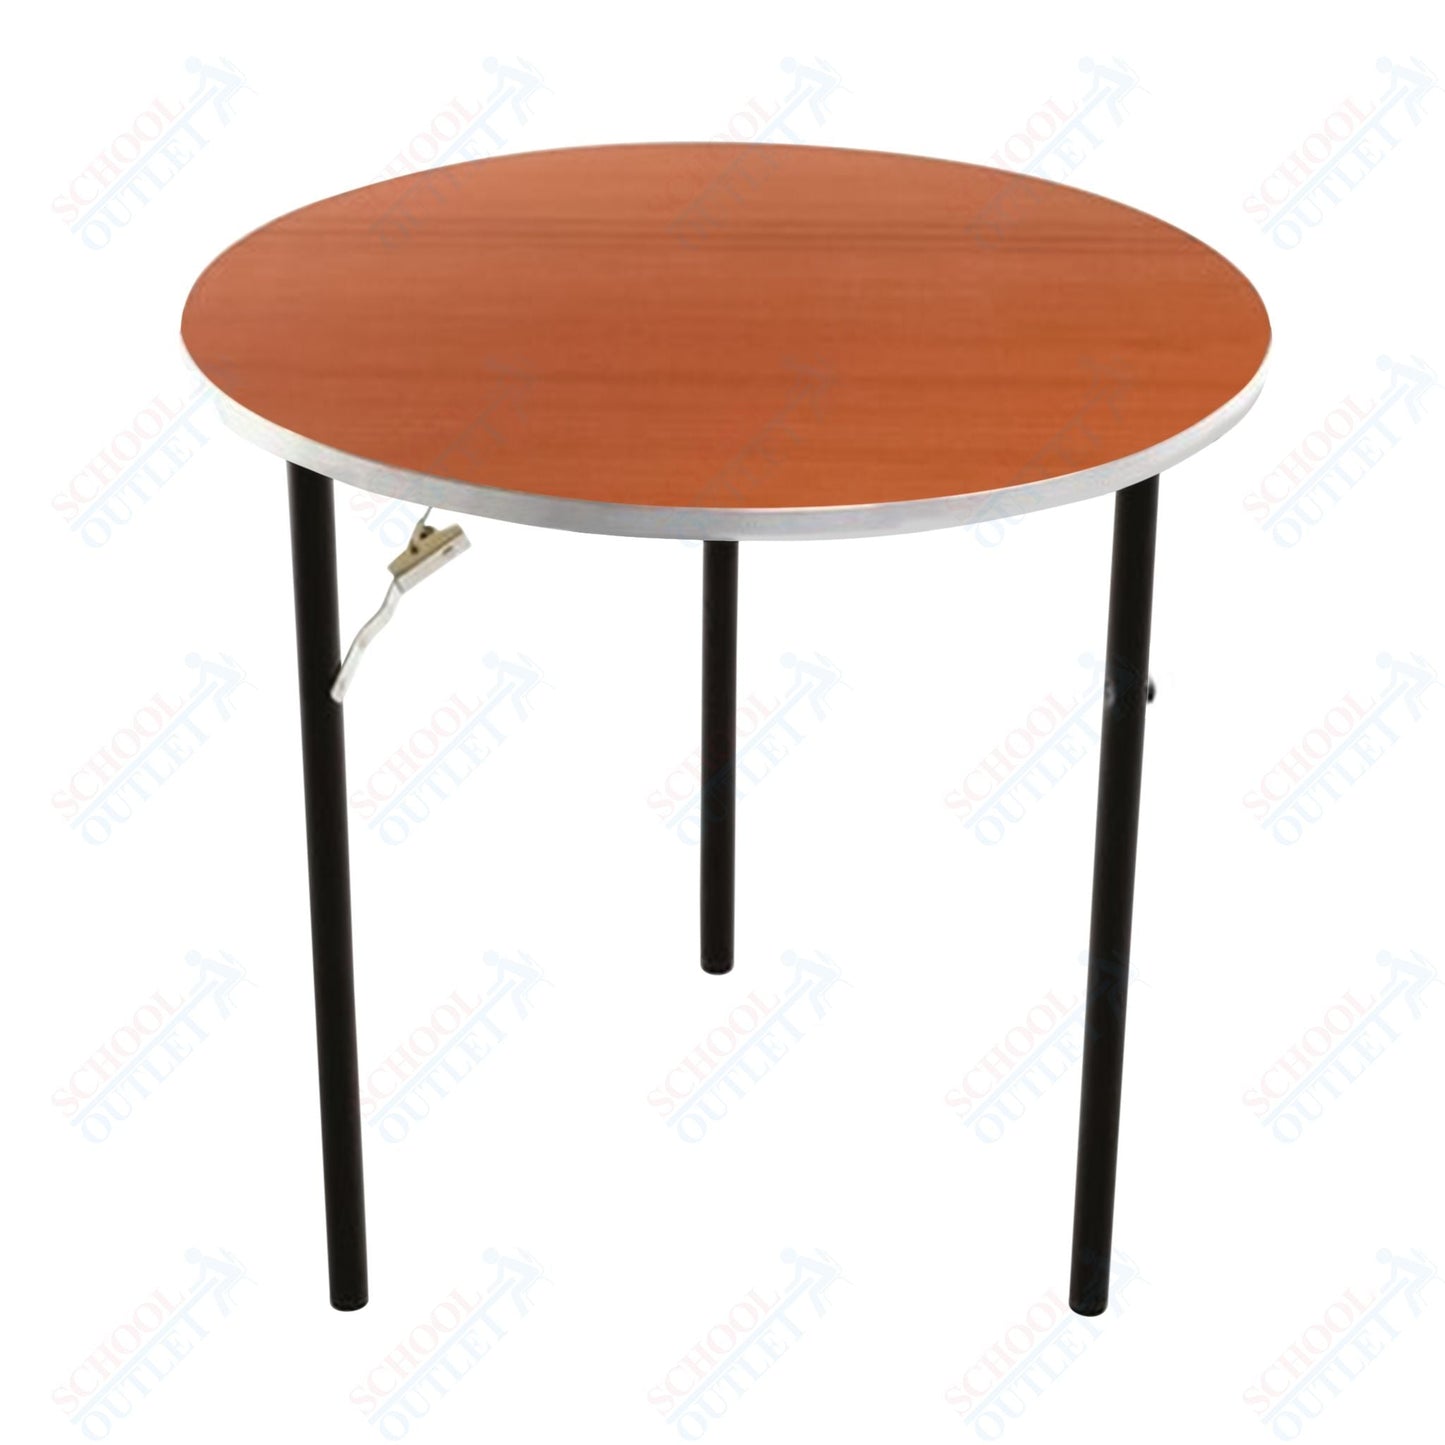 AmTab Folding Table - Plywood Stained and Sealed - Aluminum Edge - Round - 36" Diameter x 29"H (AmTab AMT - R36PA) - SchoolOutlet